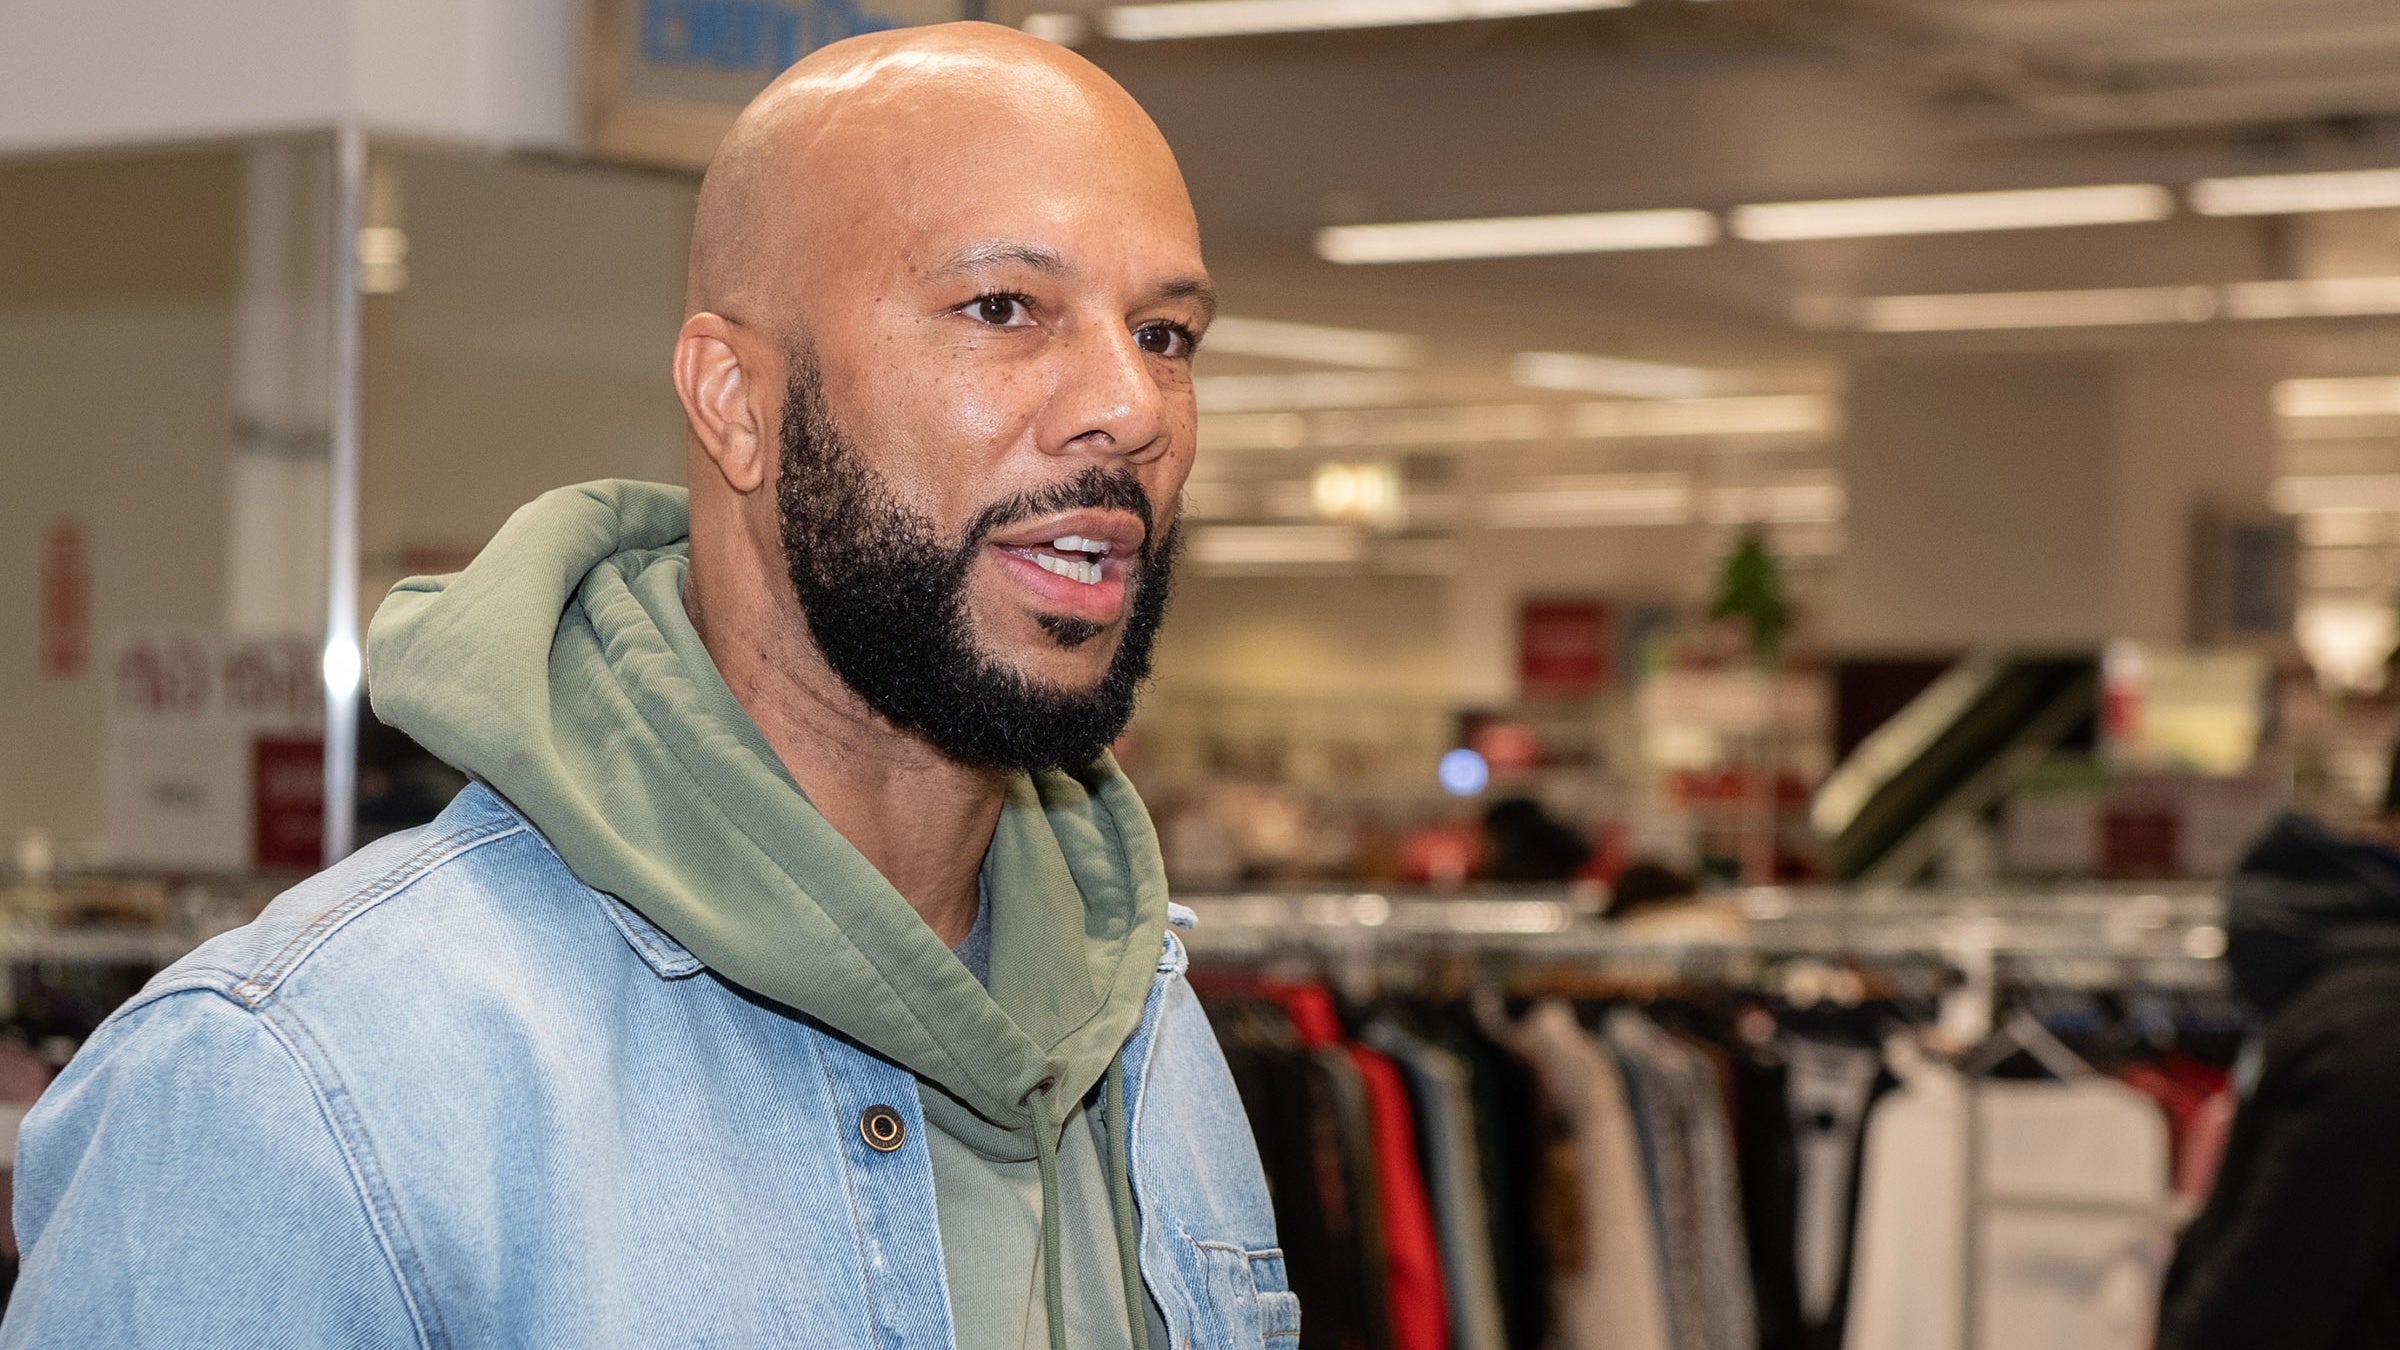 Common Partners With Burlington To Give Coats Away For The Holidays